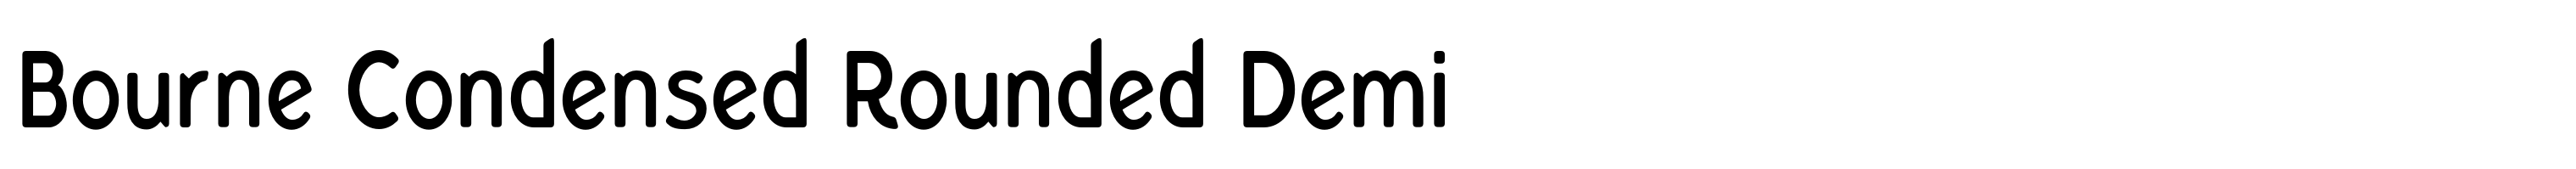 Bourne Condensed Rounded Demi